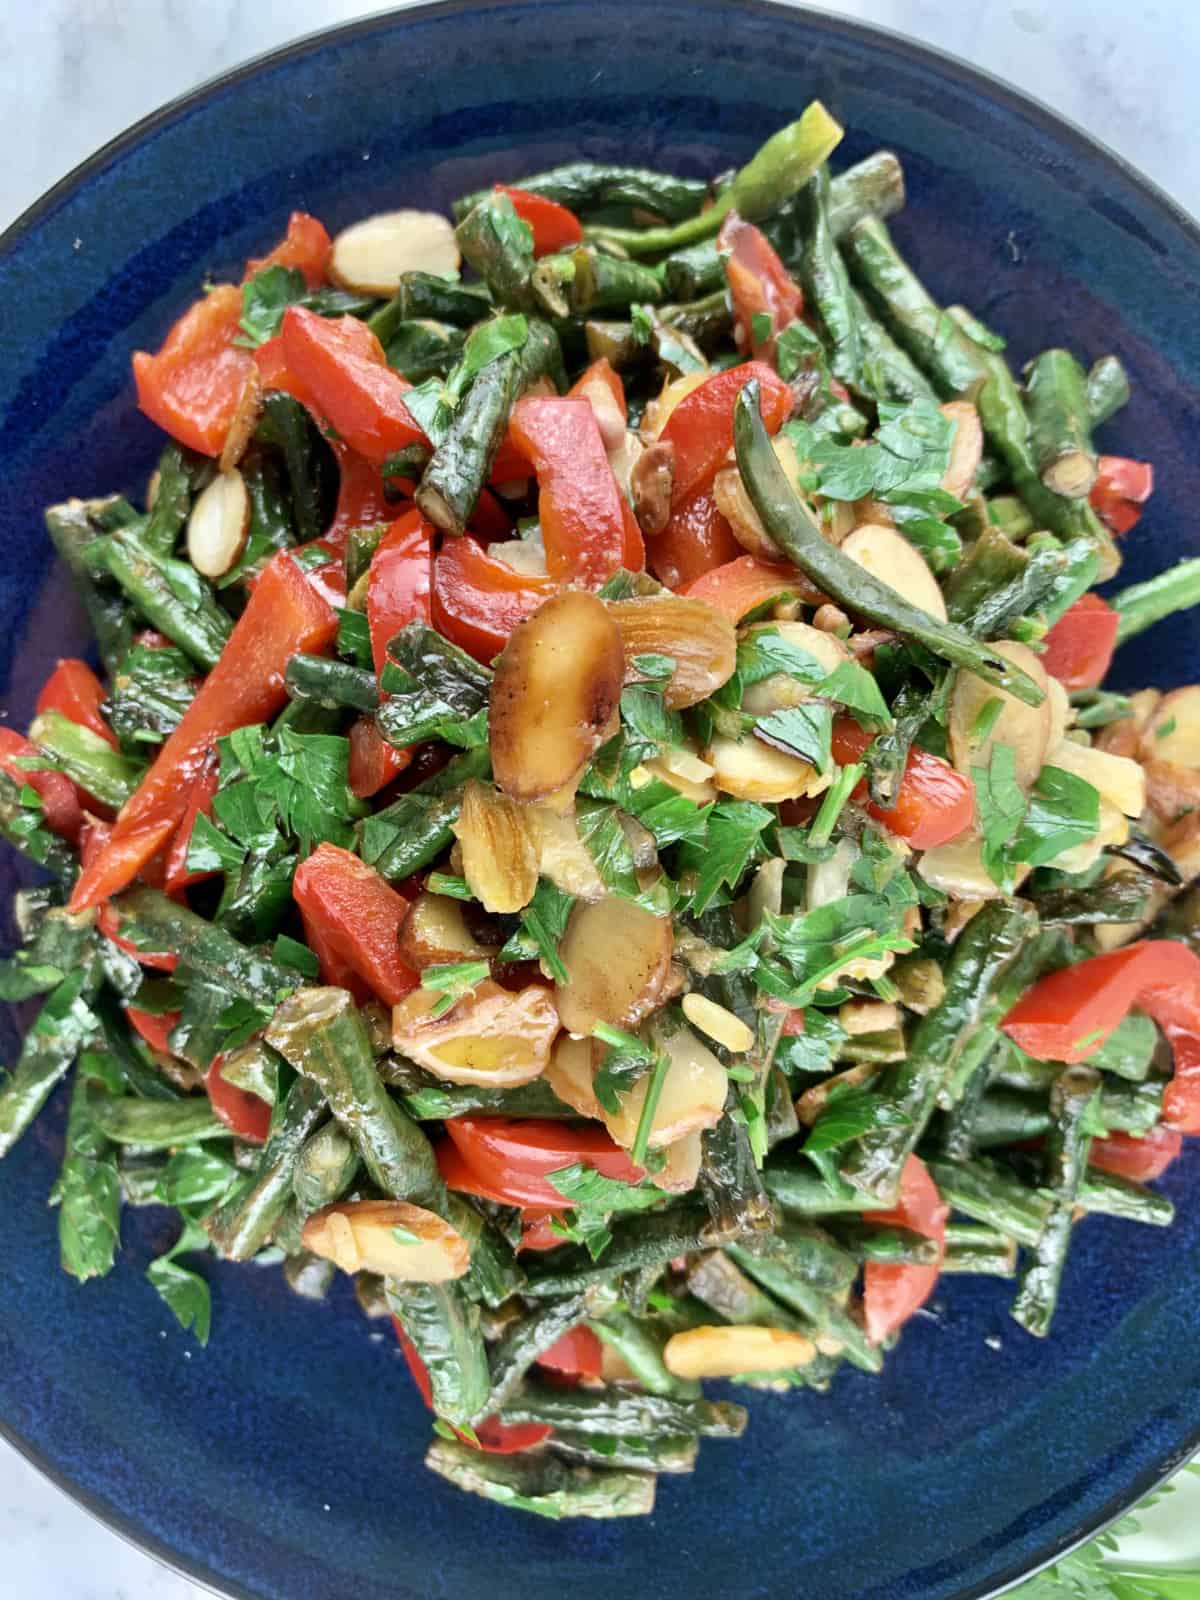 A close-up of Snake Bean Salad with Red Peppers and Almonds on a blue plate.